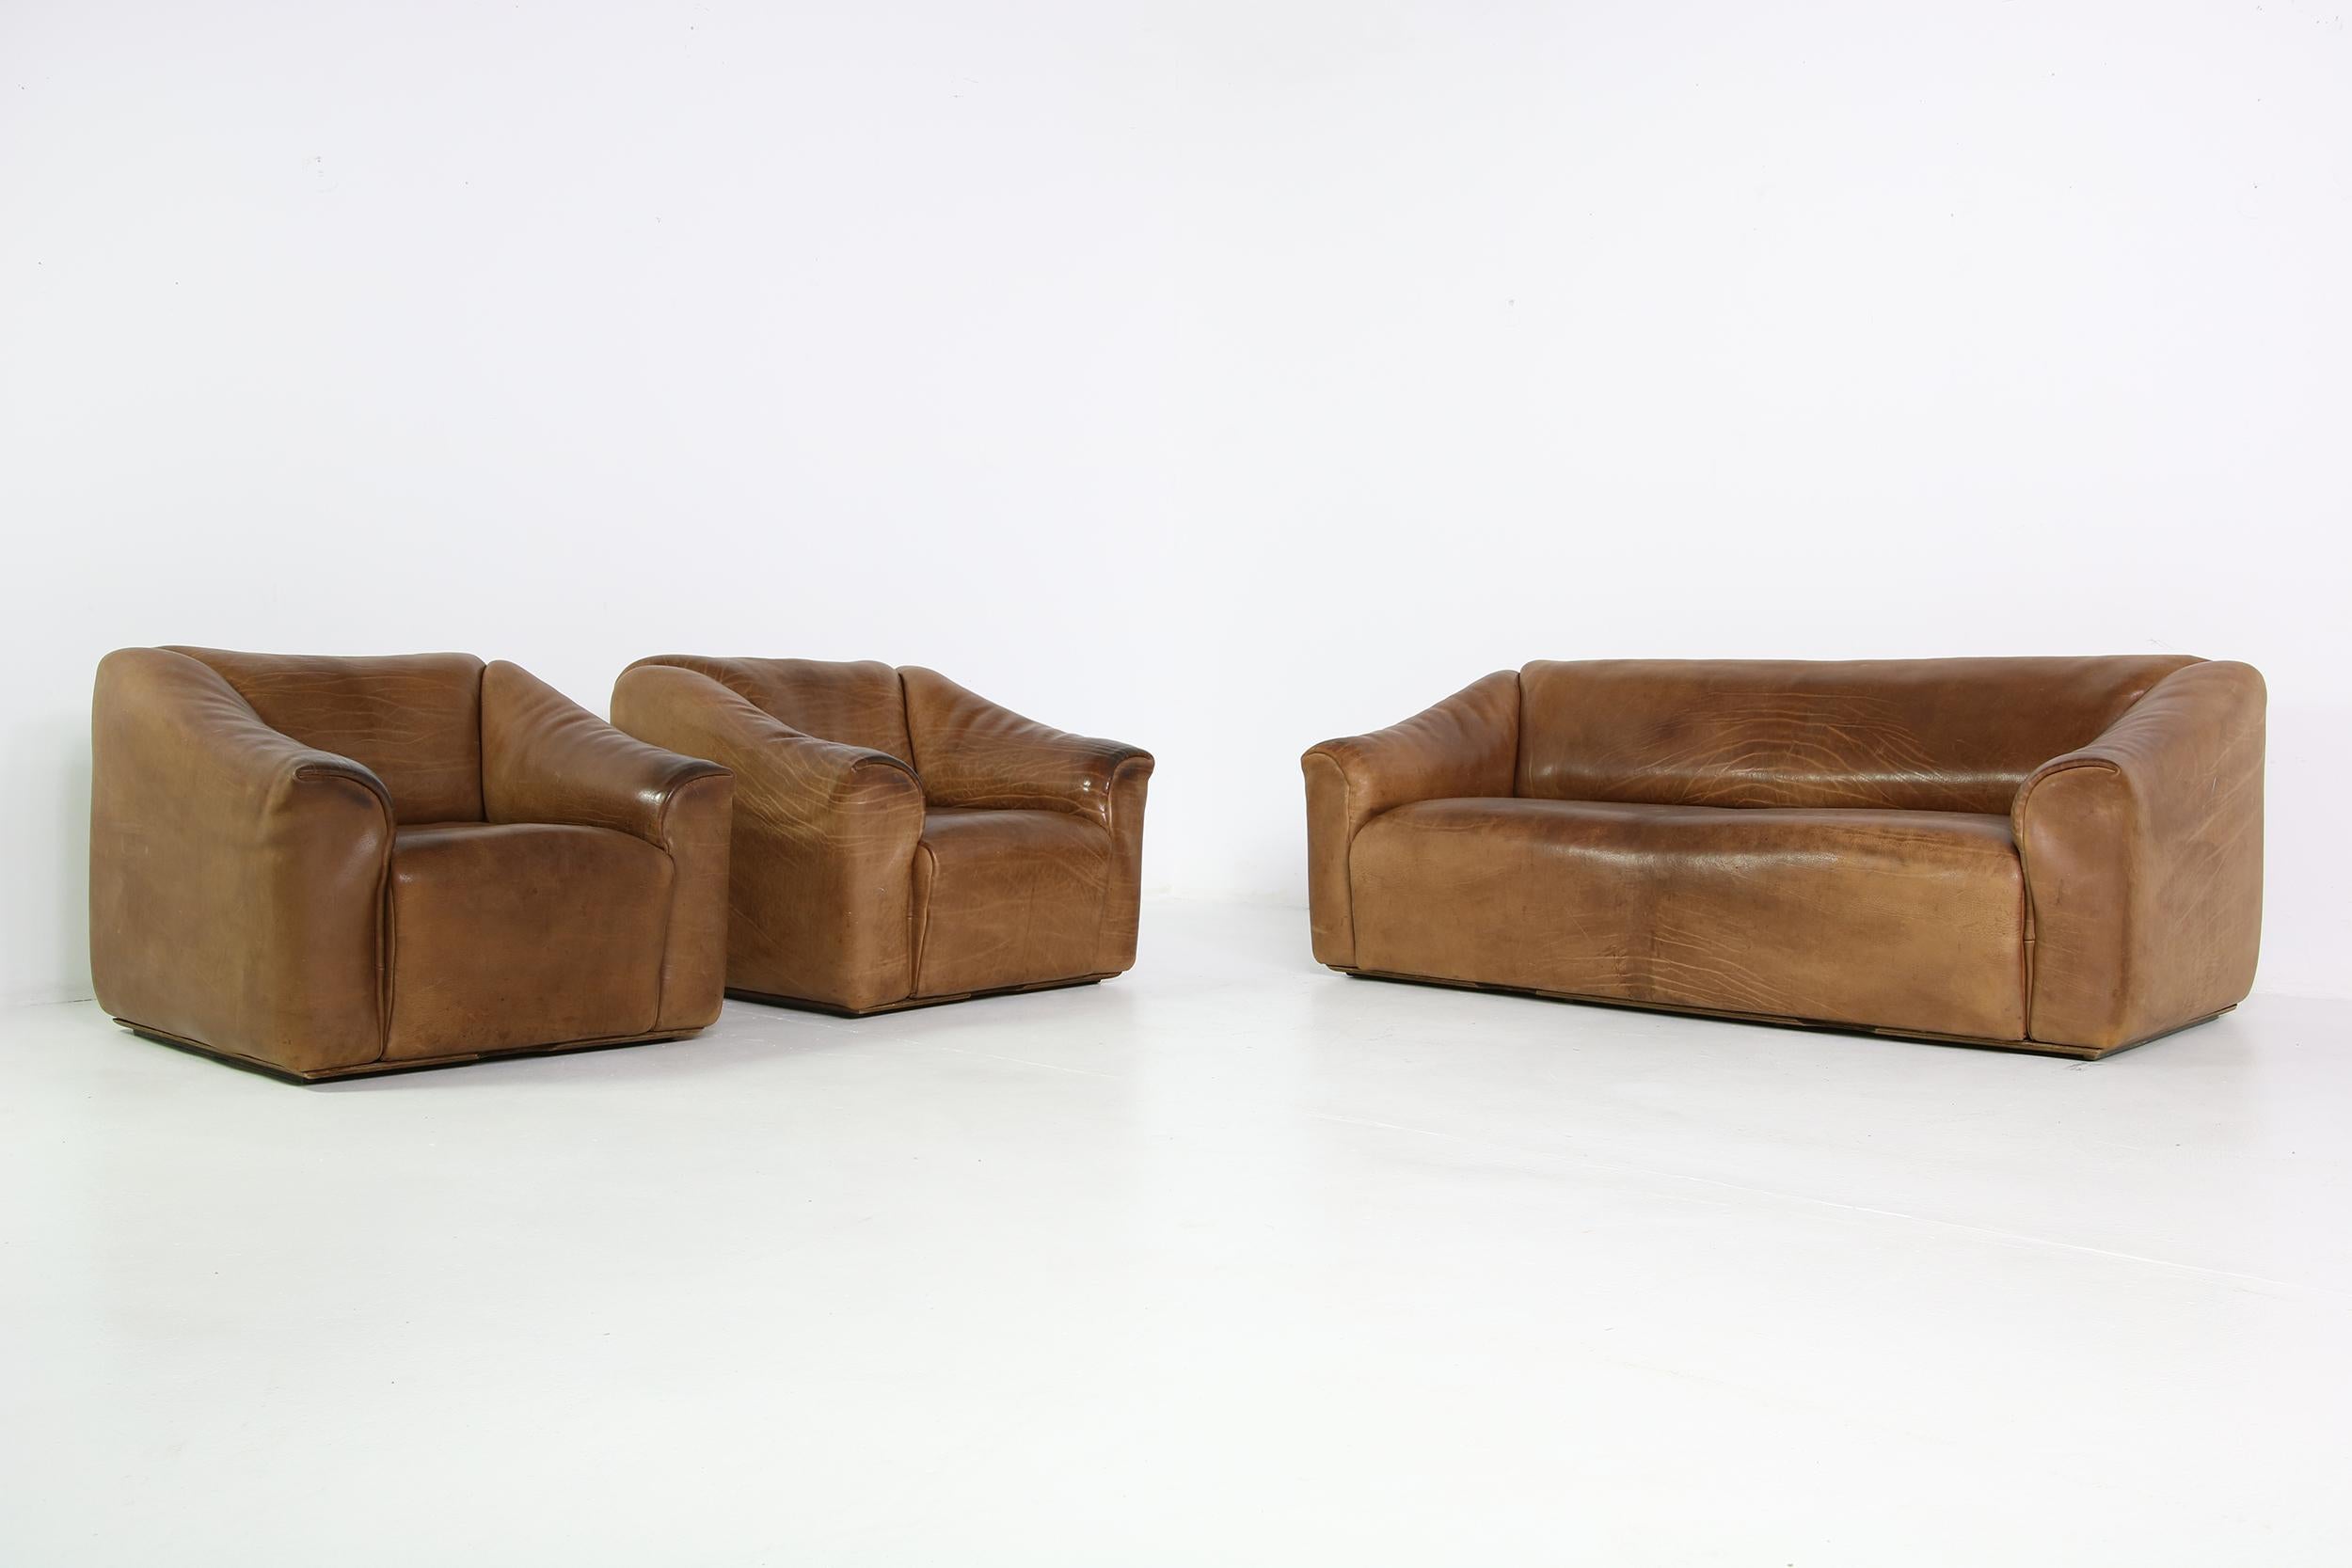 A rare and beautiful set, manufactured in the late 1970s by De Sede Switzerland, Mod. DS 47 a three-seat and two matching lounge chairs, a fantastic vintage condition, beautiful brown, cognac leather, all pieces with extendable seats, the pieces are